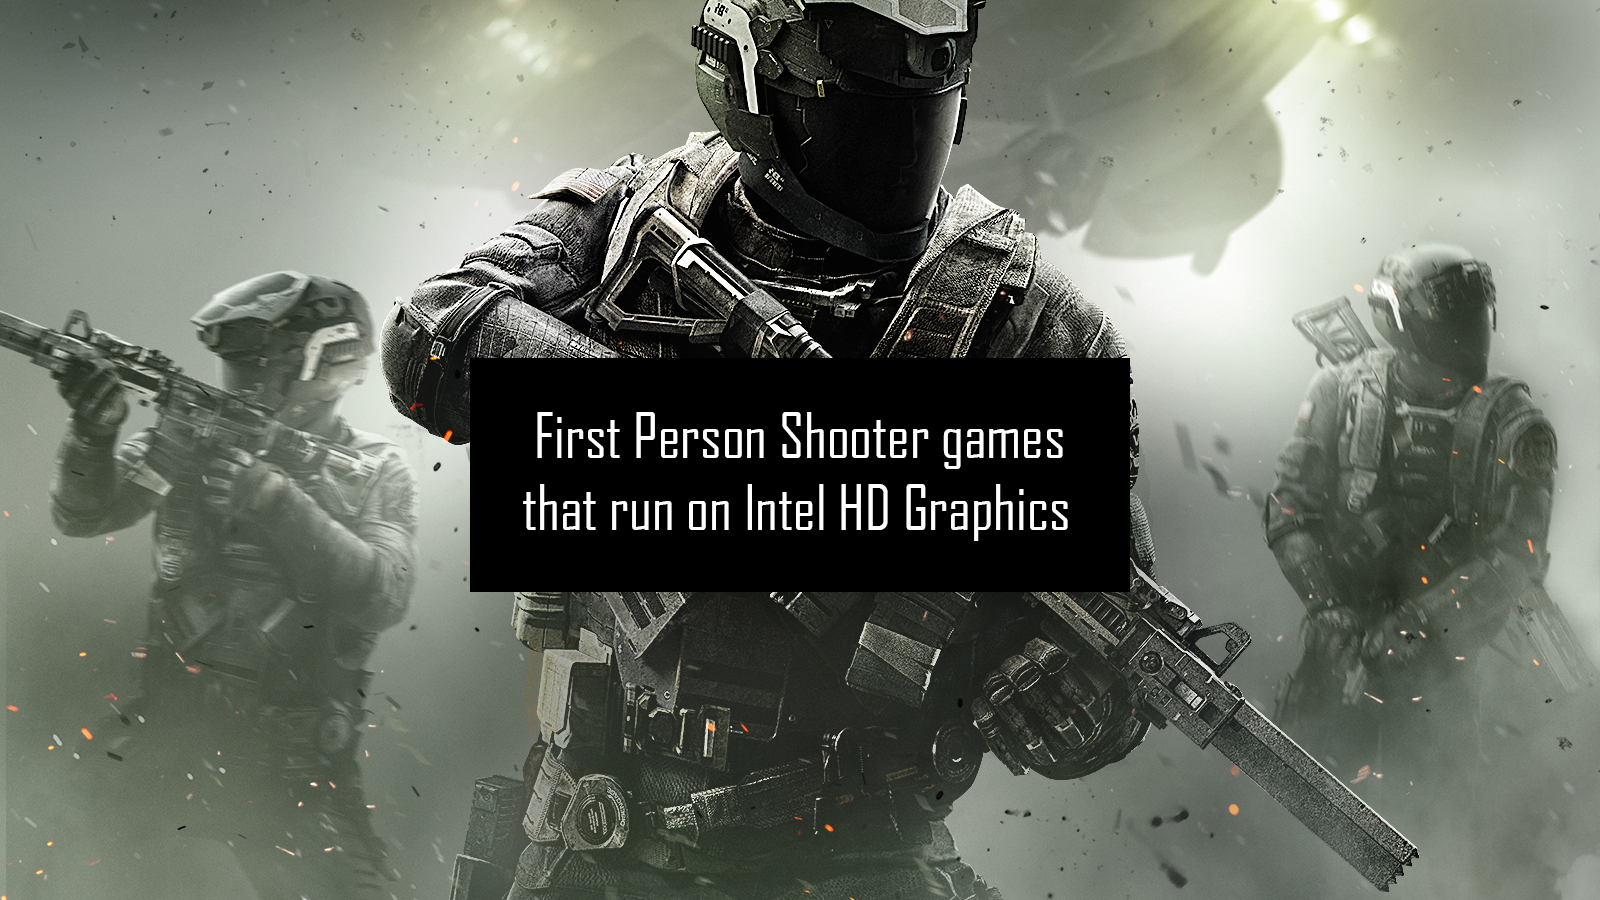 GuideGamingList of First Person Shooter (FPS) games that run on Intel HD Graphics 4400/ 4600/ 5500/ 520/ 530/ 620/ 630